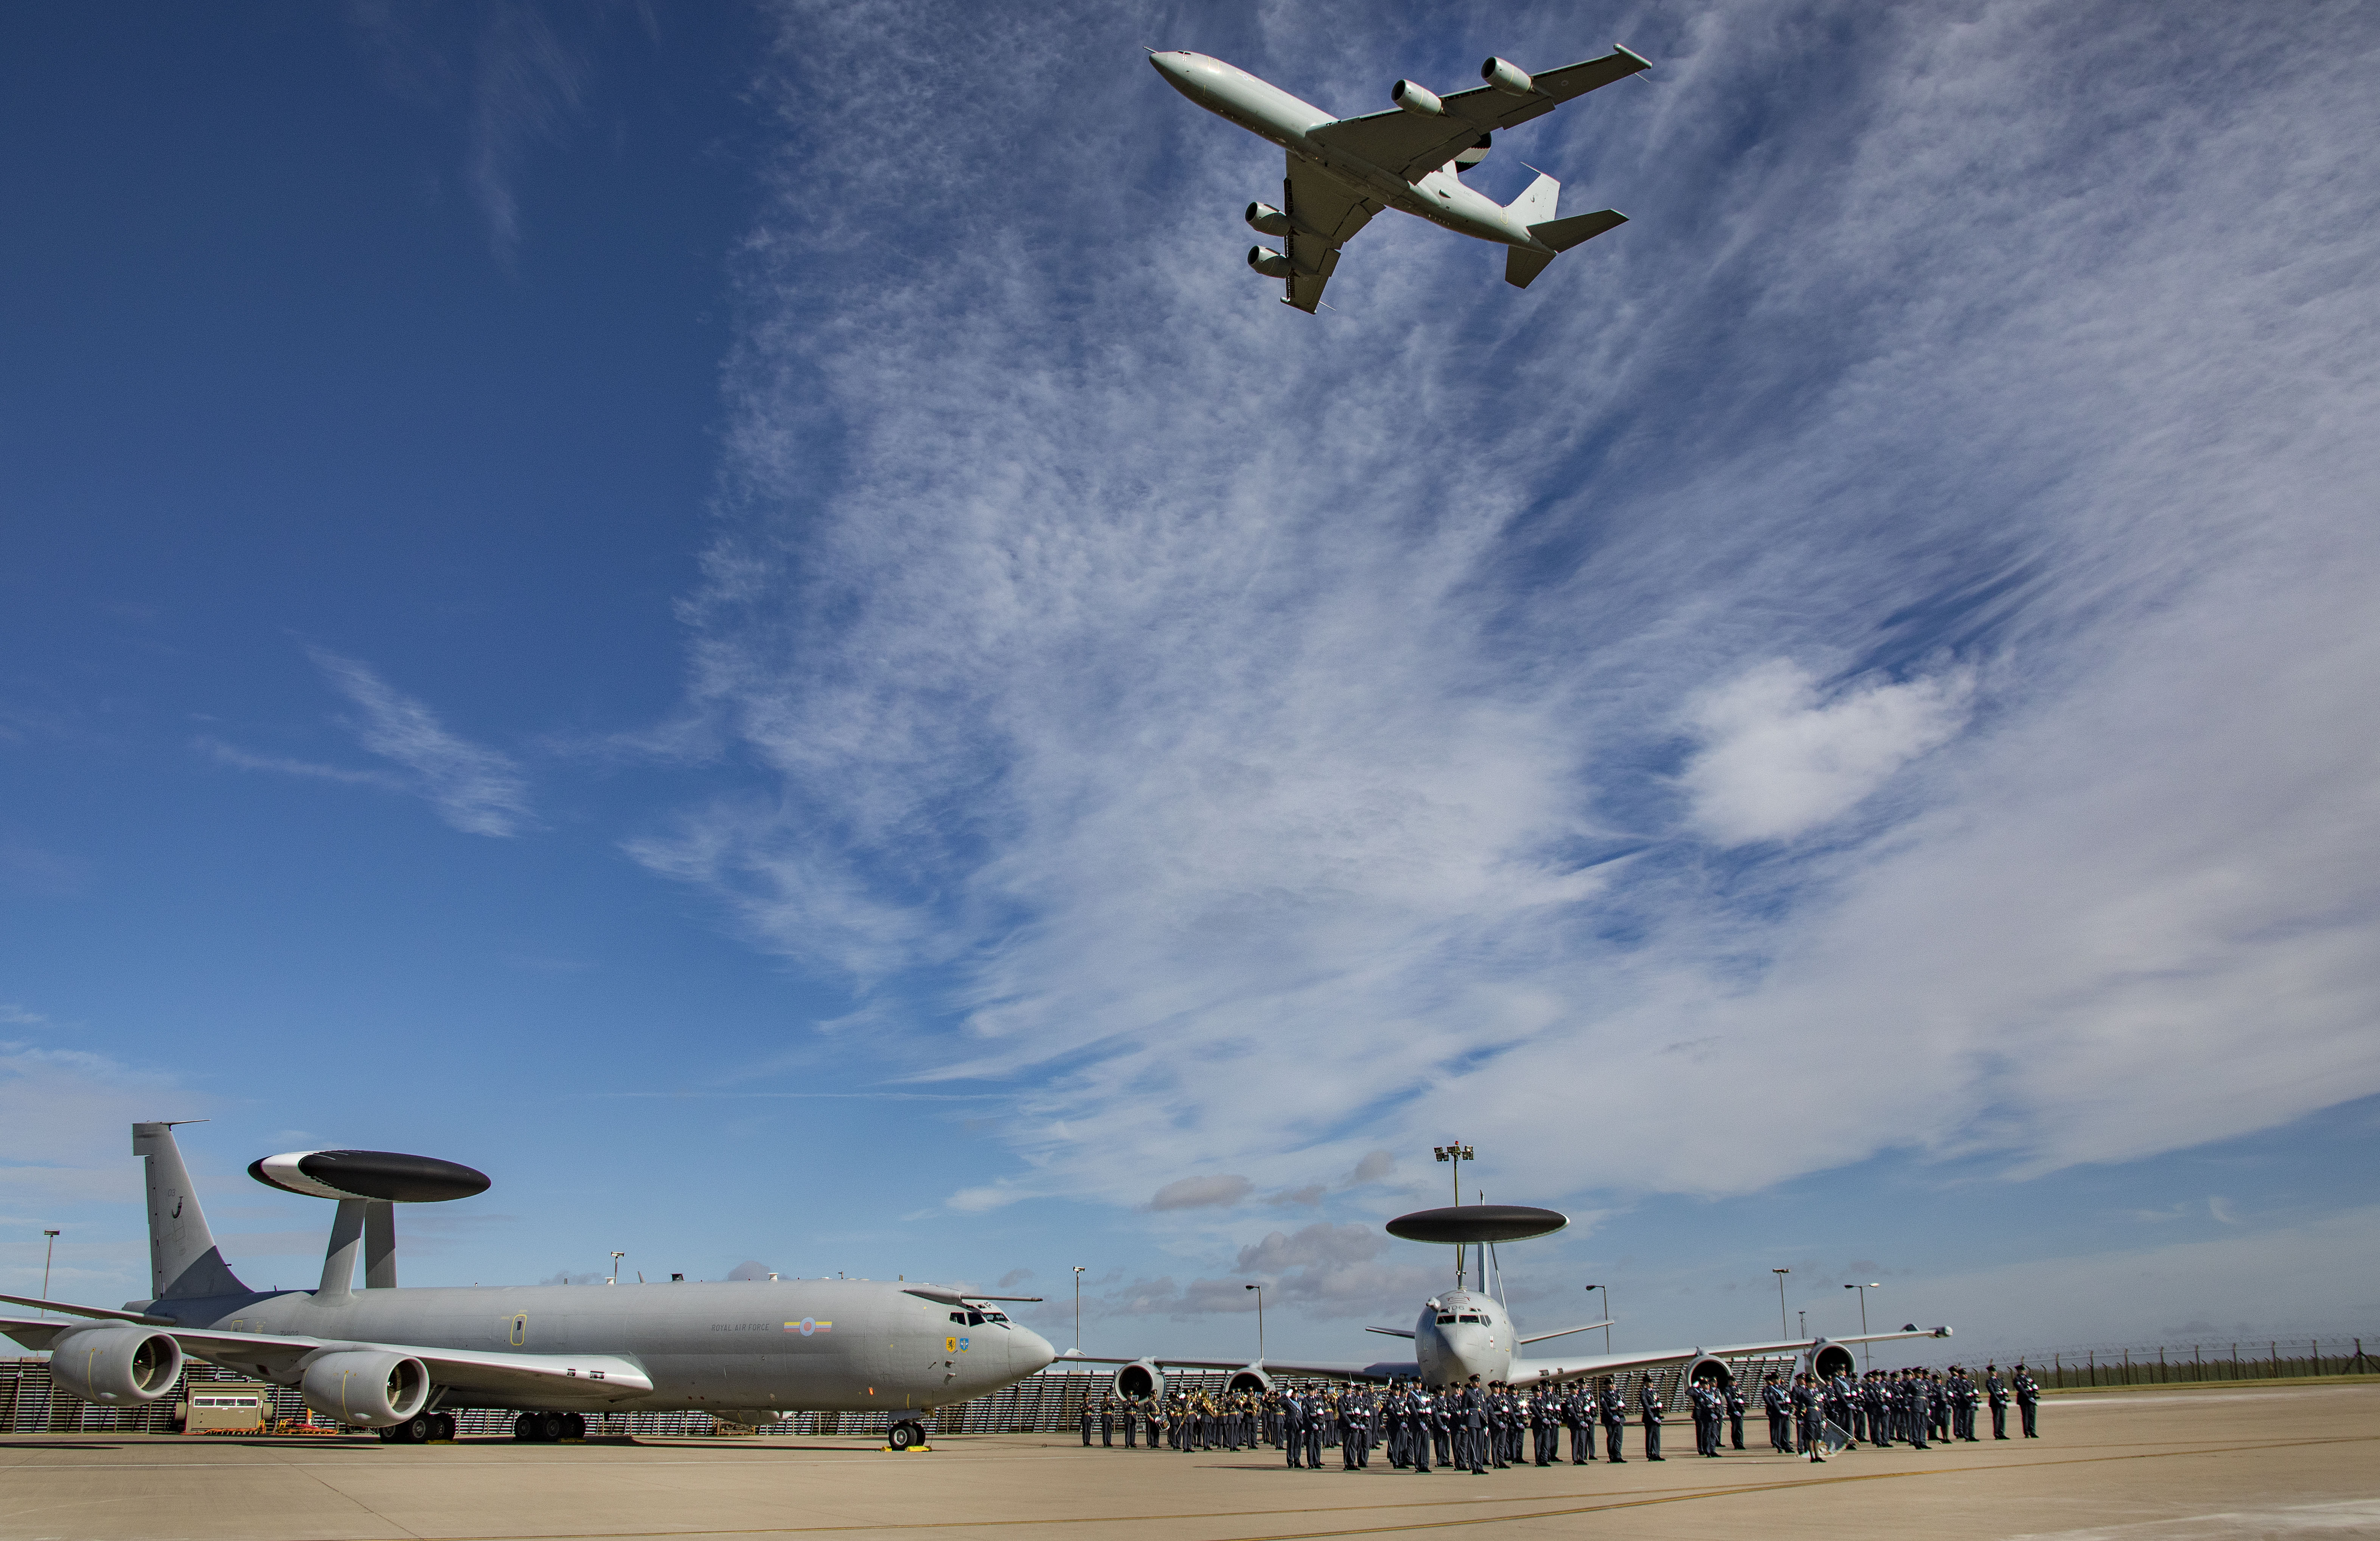 Two aircraft on the runway with parade, as aircraft flies over.